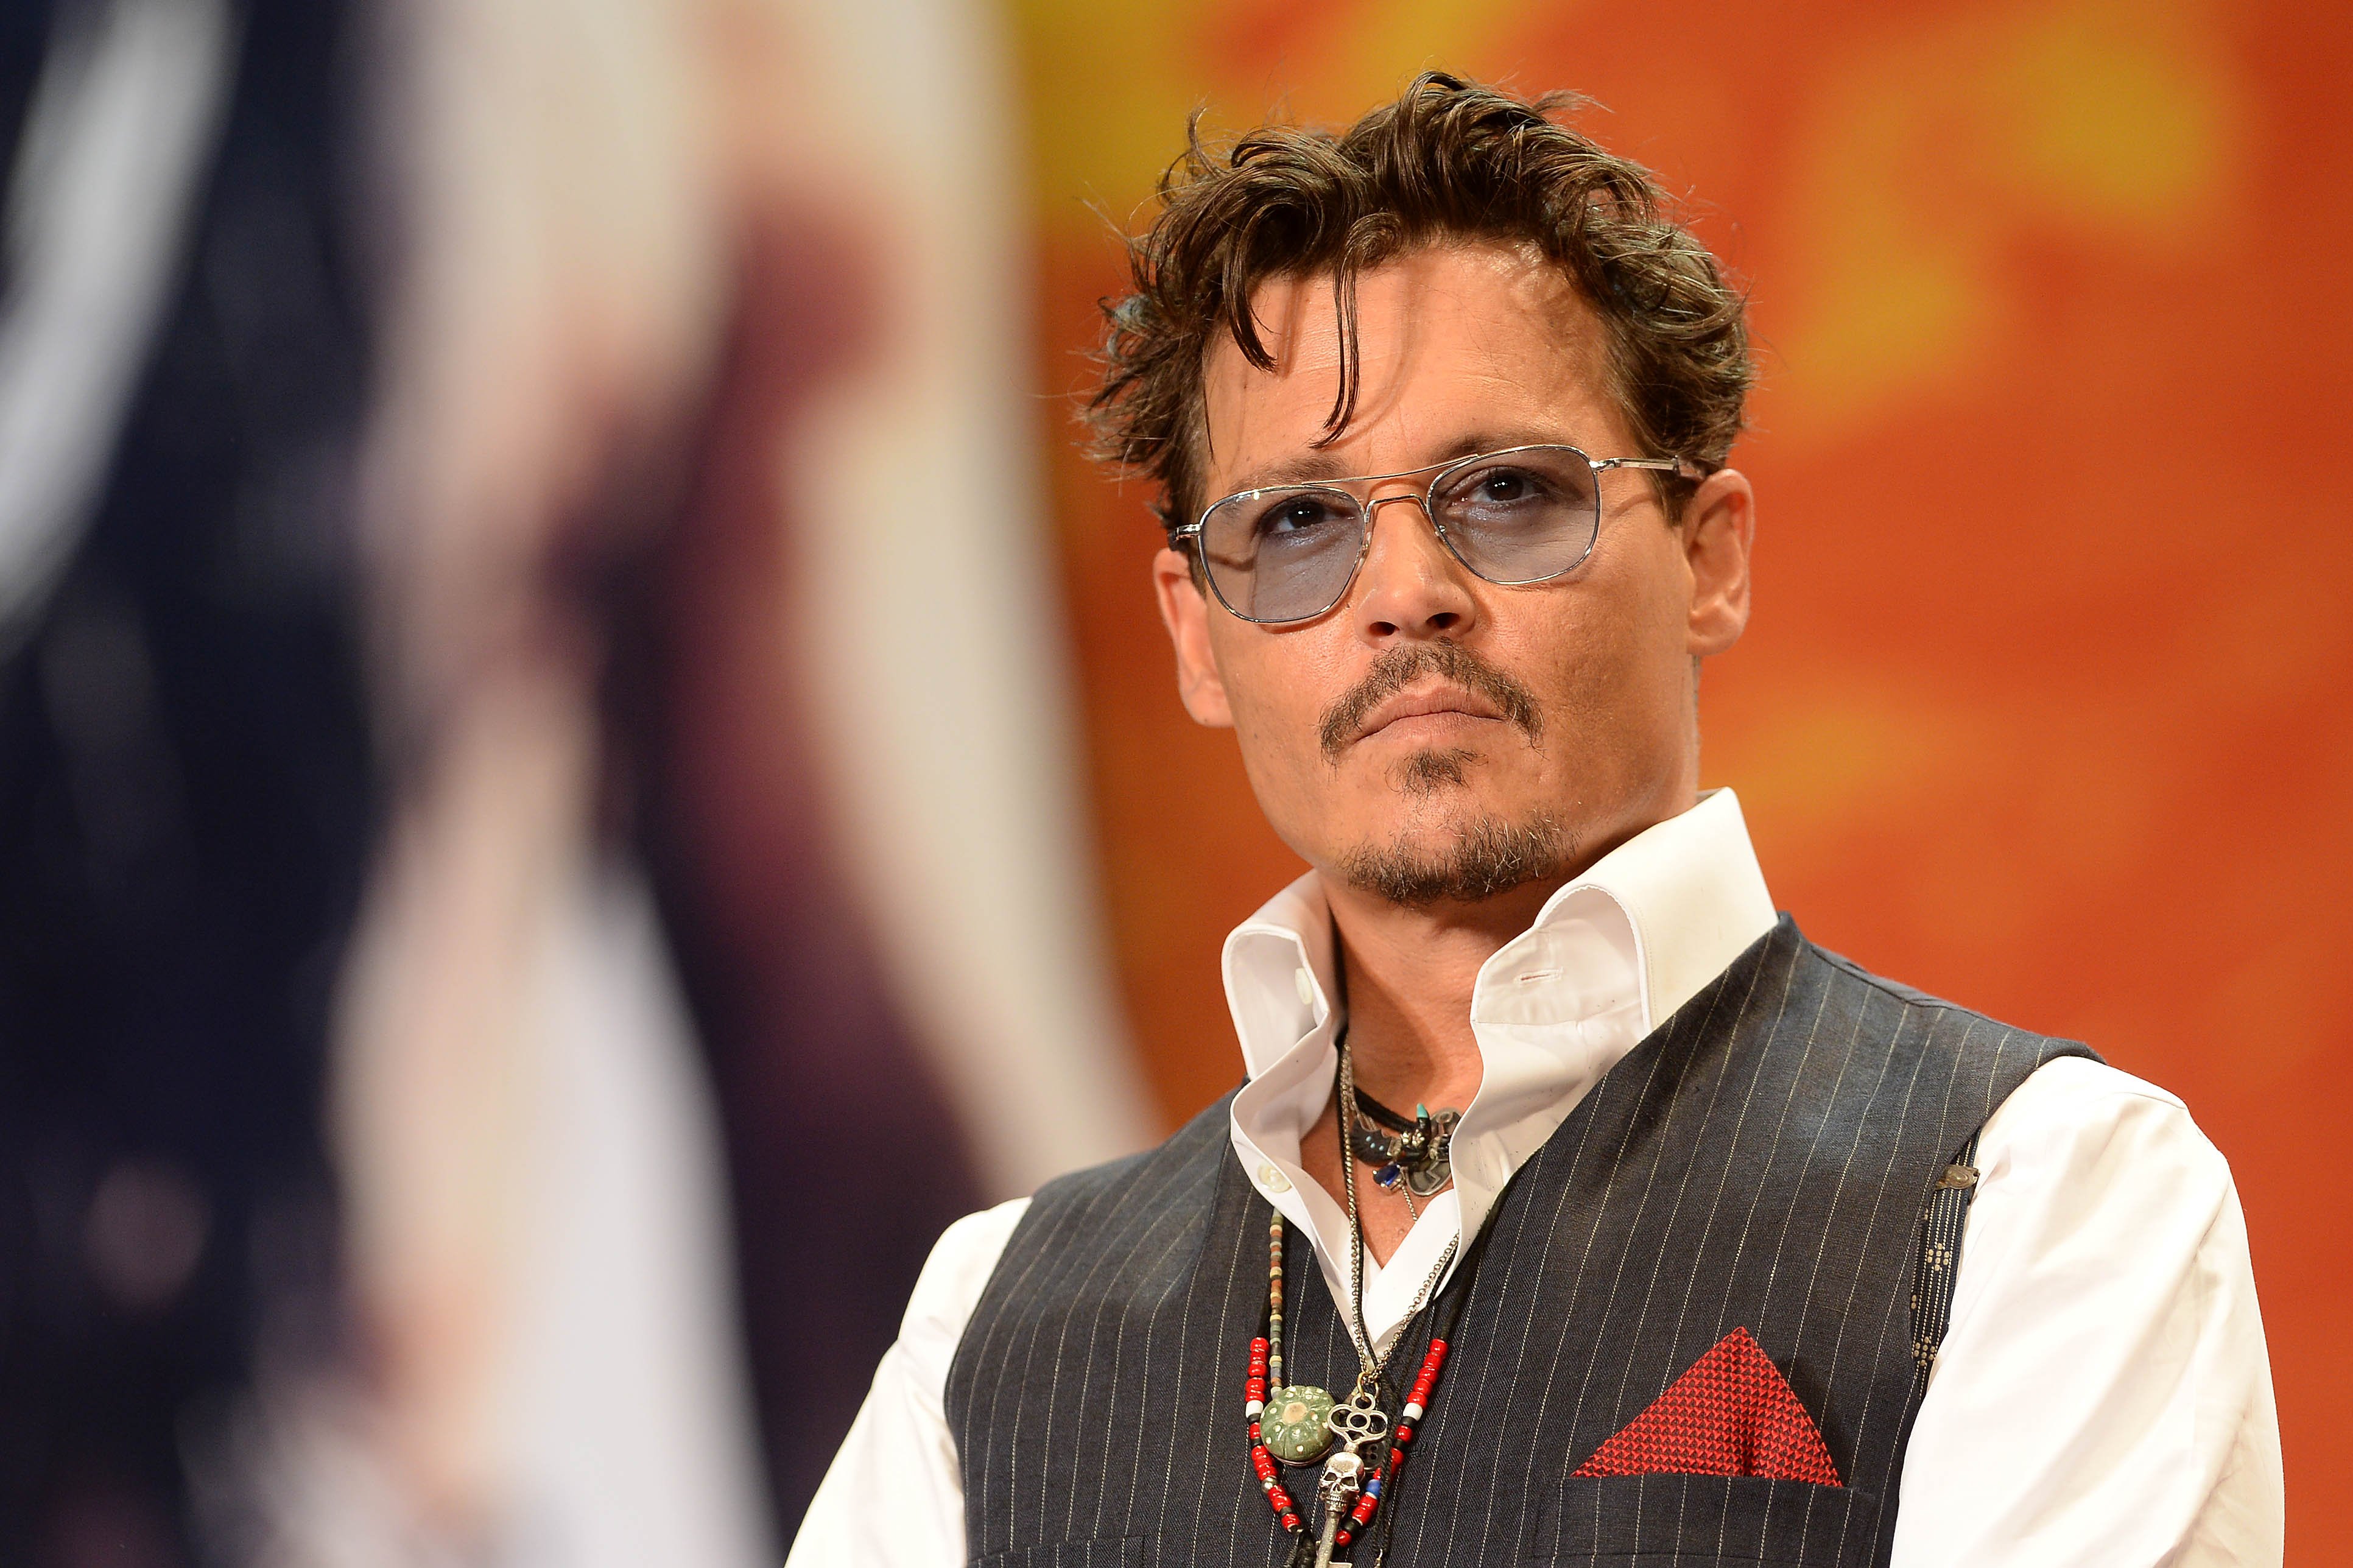 Johnny Depp in Japan in 2013 | Source: Getty Images